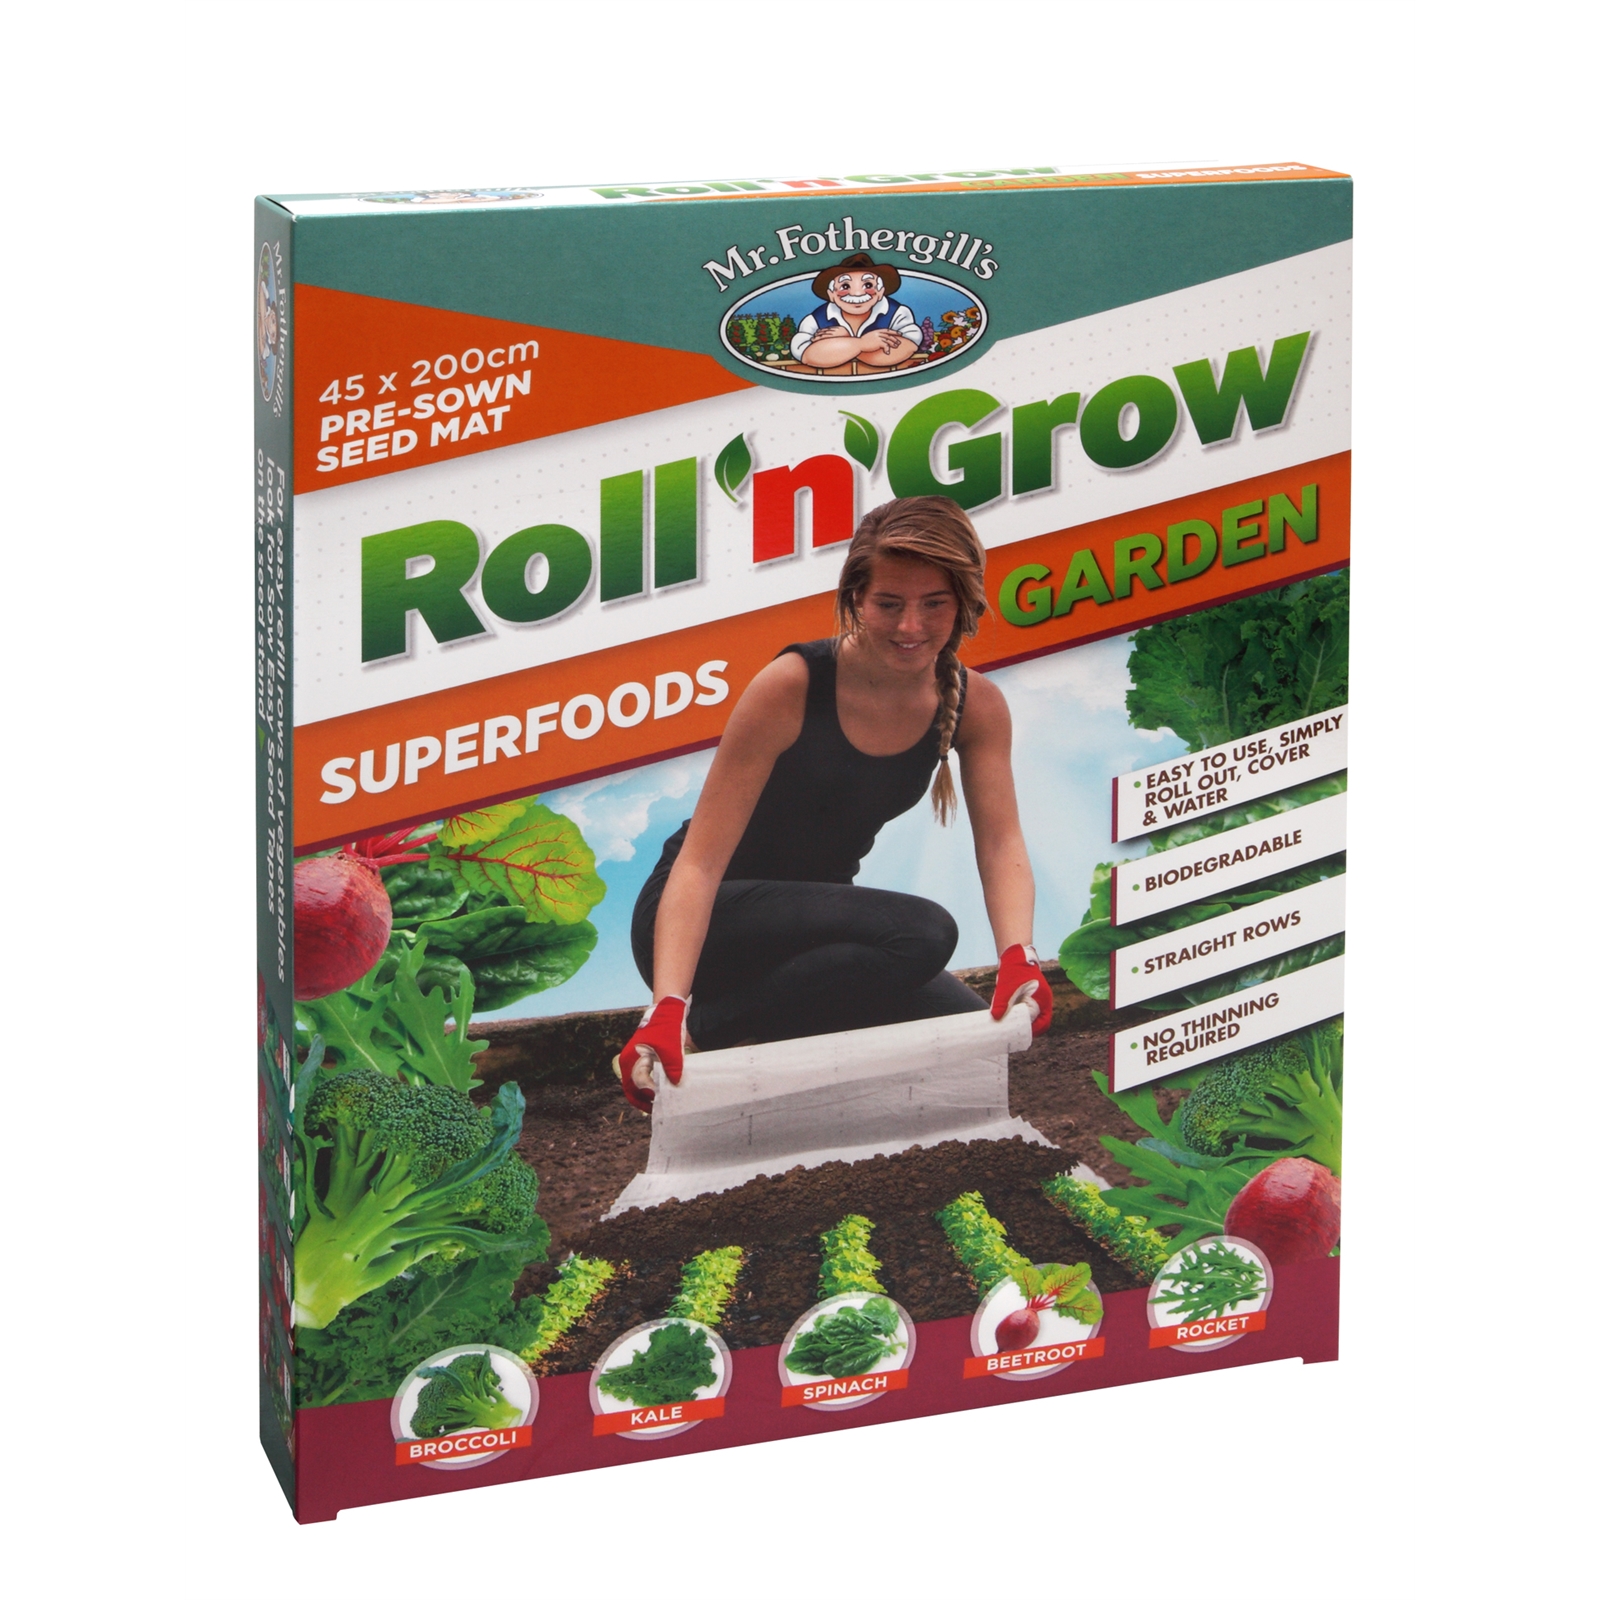 Mr Fothergill's Roll 'n' Grow Gardens Superfoods